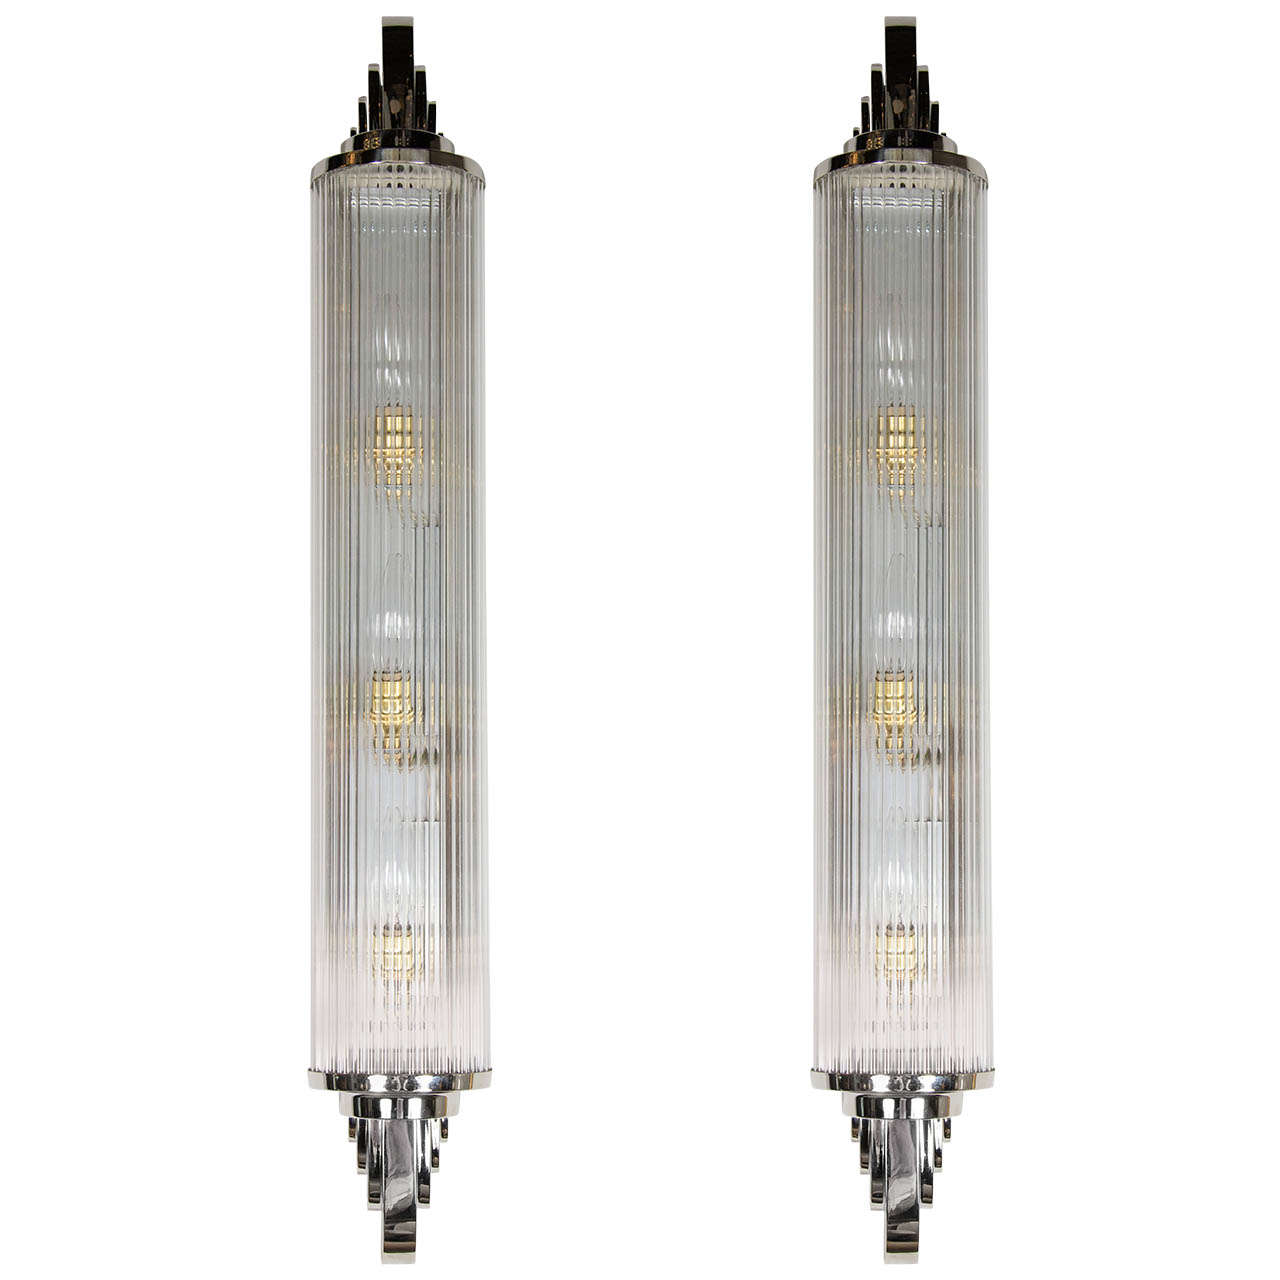 Pair of French Art Deco Skyscraper Style Sconces in Nickeled Bronze & Glass Rods